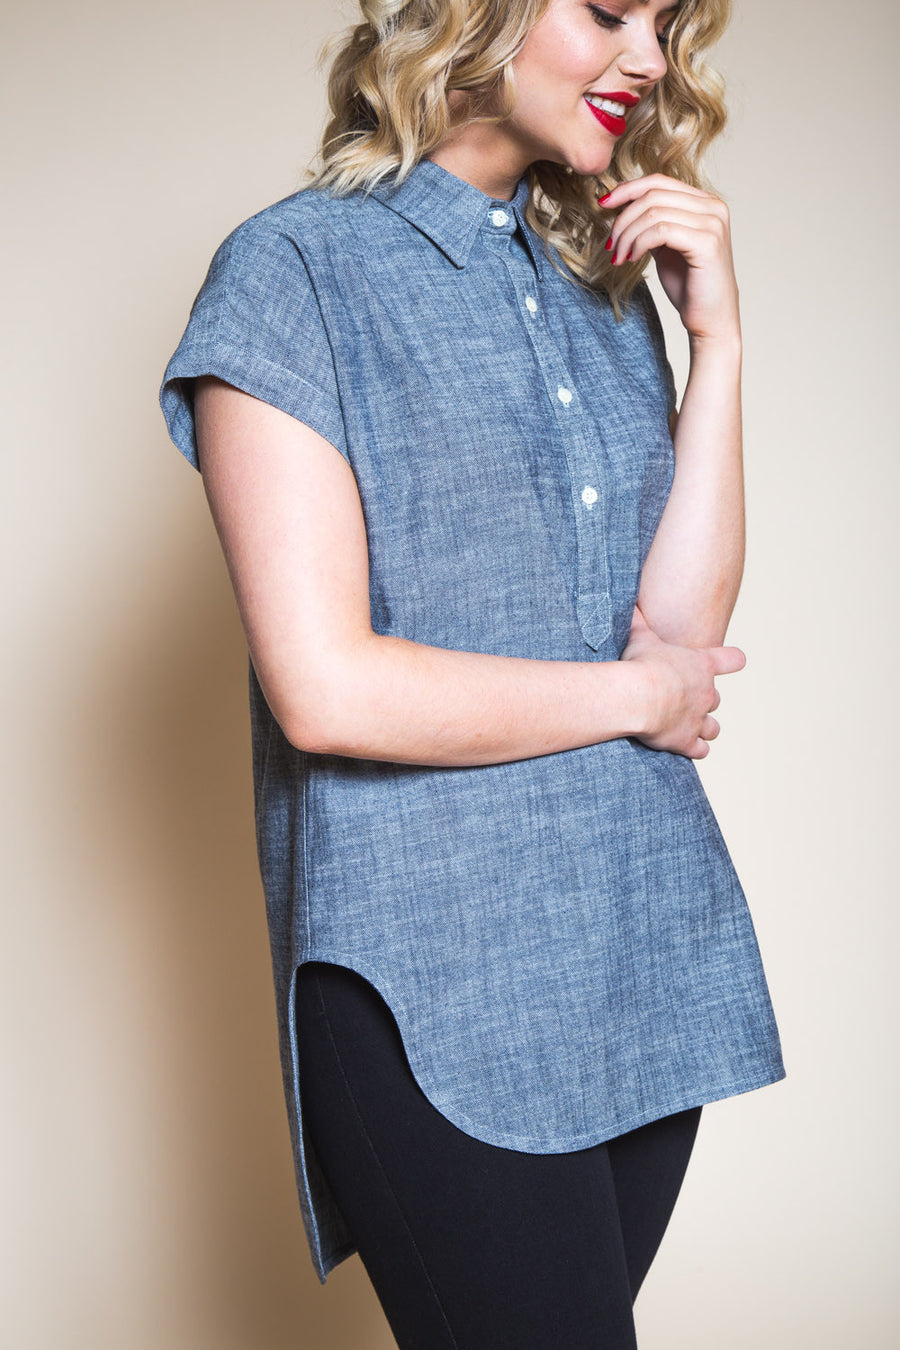 Kalle Button-down Shirt Pattern // Tunic with popover placket // Closet Core Patterns